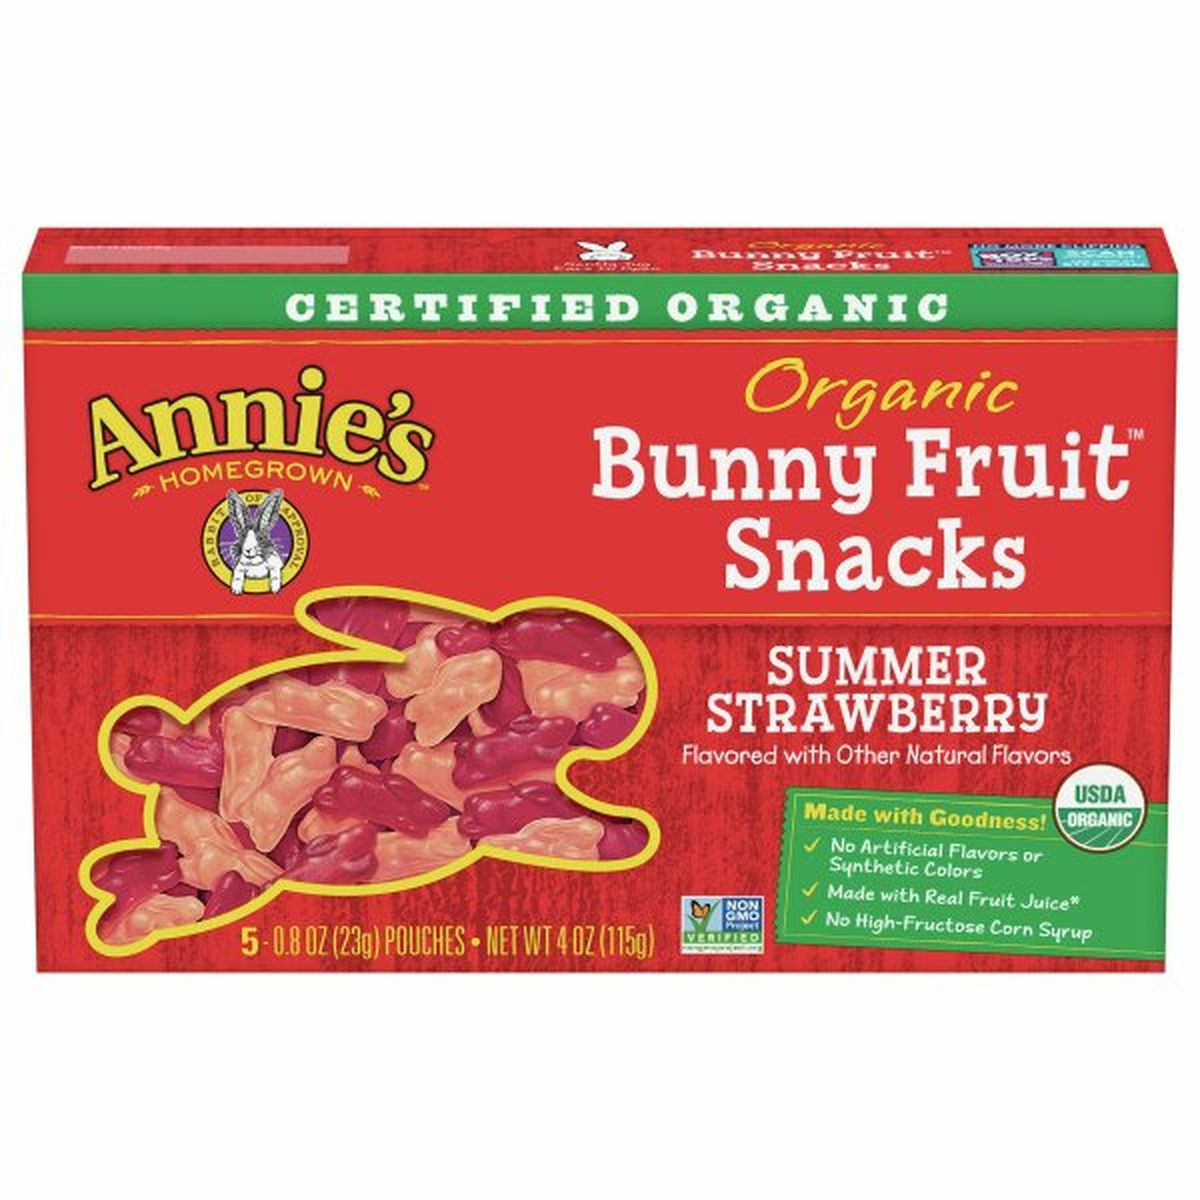 Calories in Annie's Bunny Fruit Snacks, Organic, Summer Strawberry